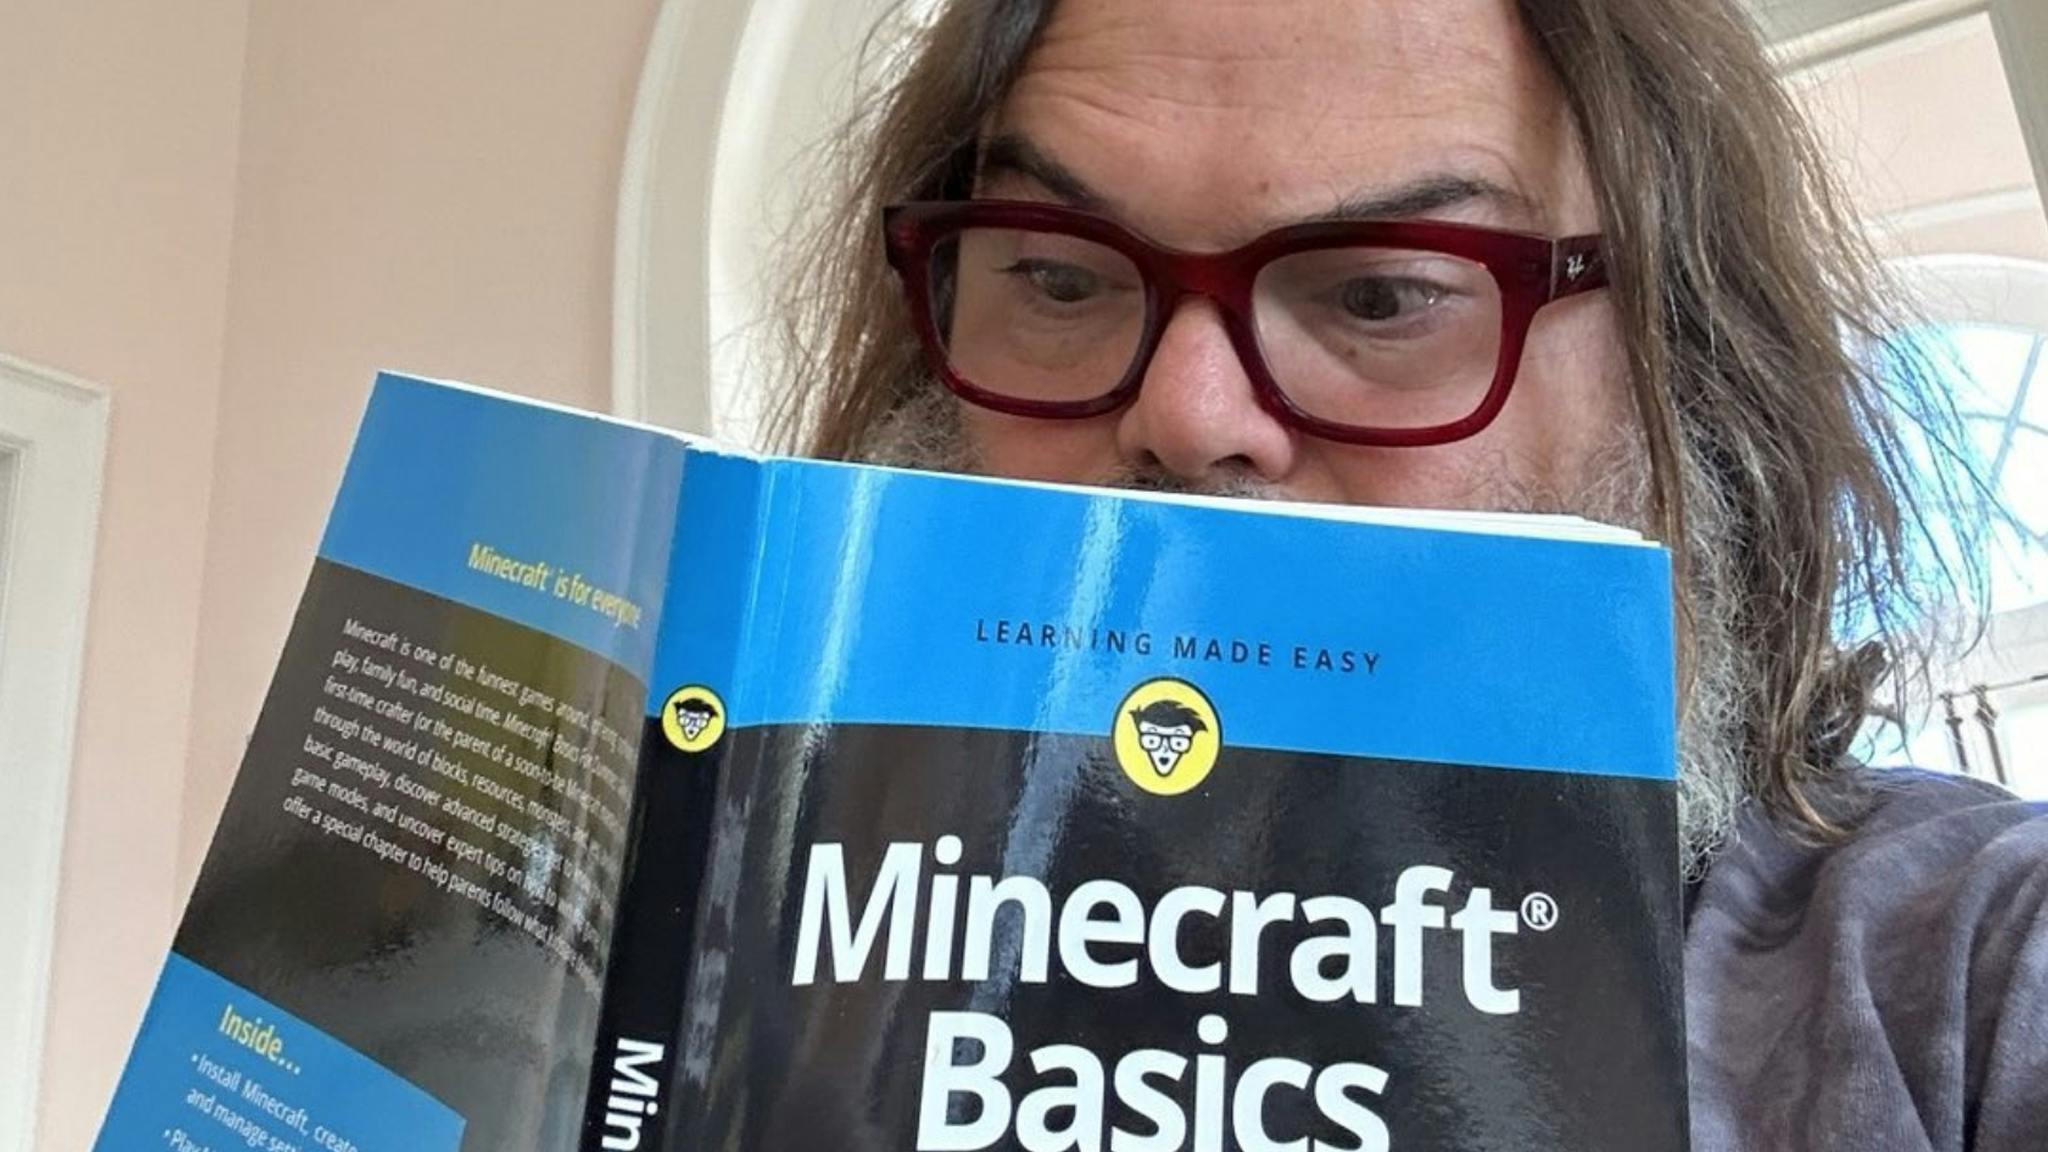 Jack Black confirms he’ll be in the new Minecraft movie